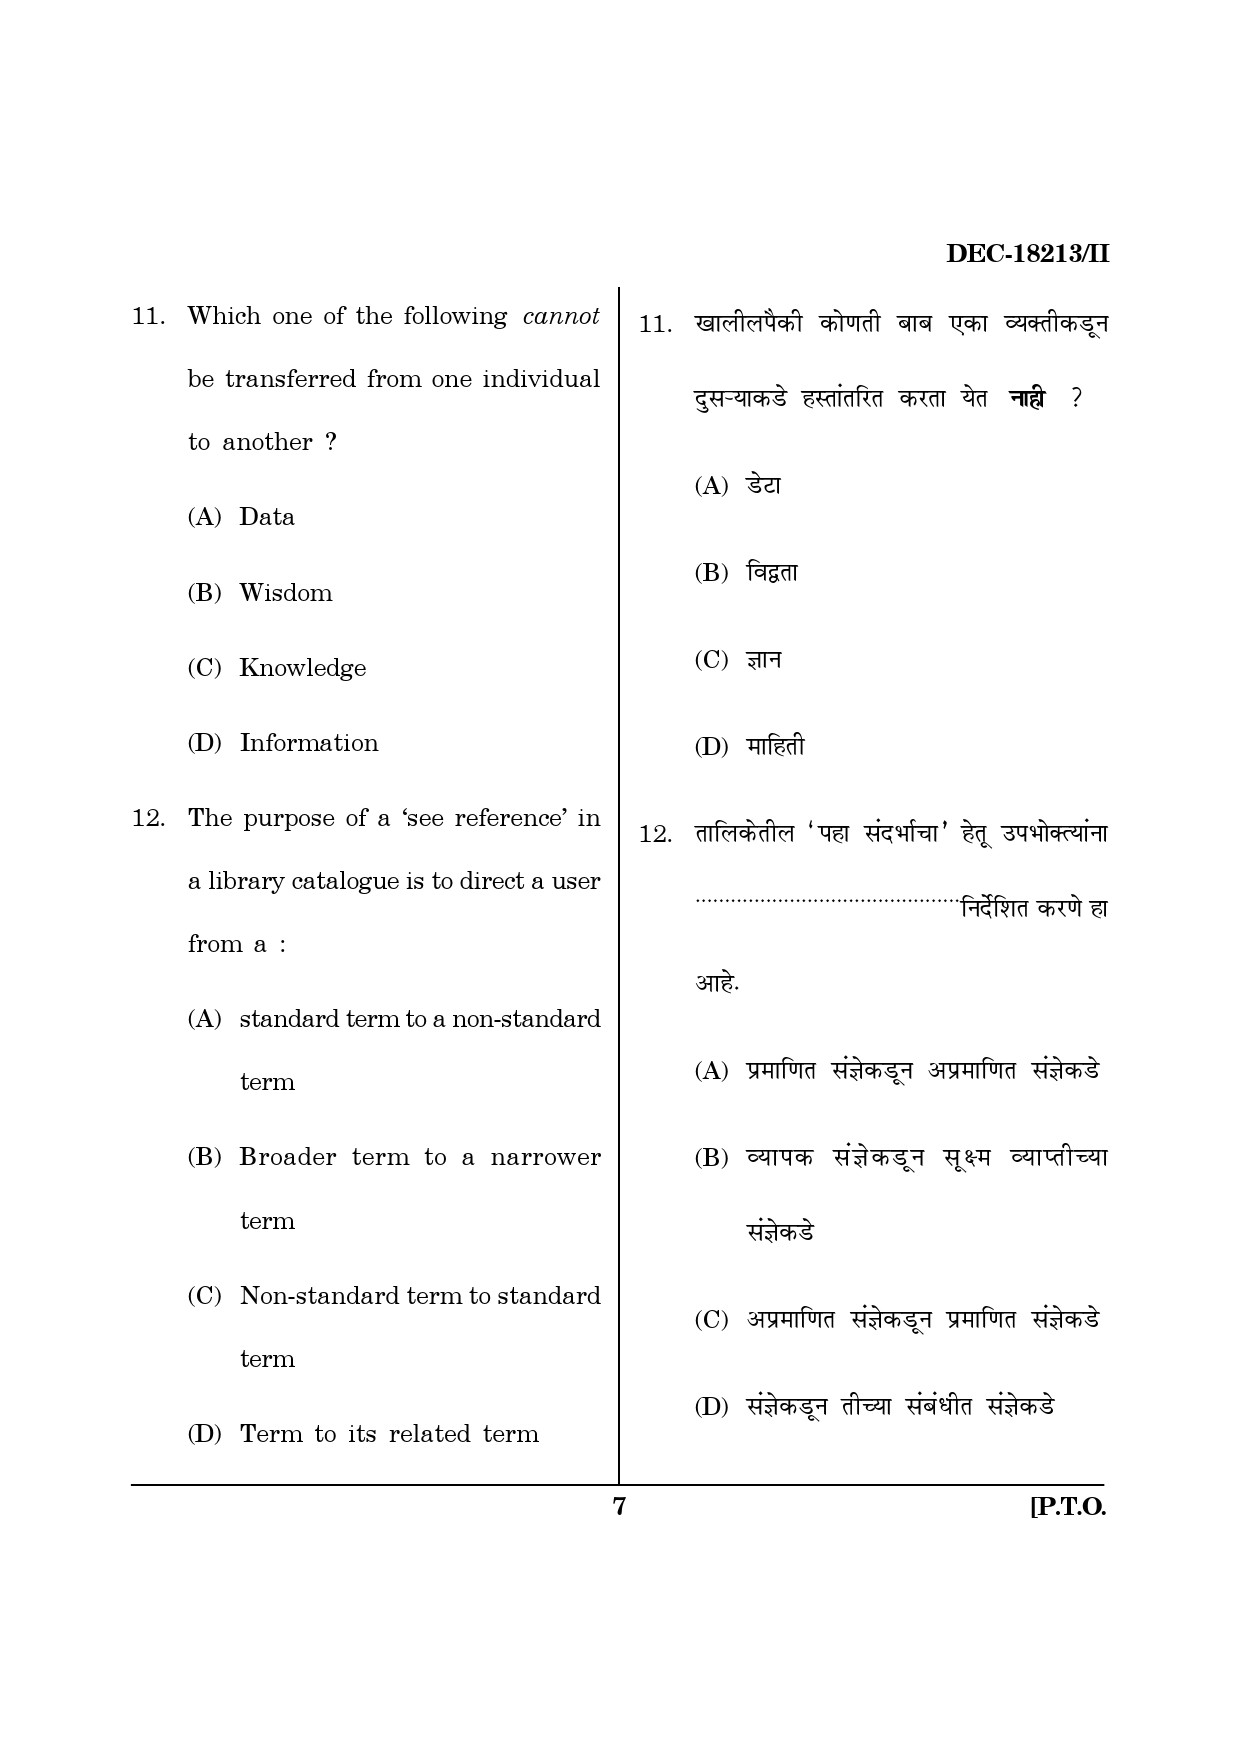 Maharashtra SET Library Information Science Question Paper II December 2013 6